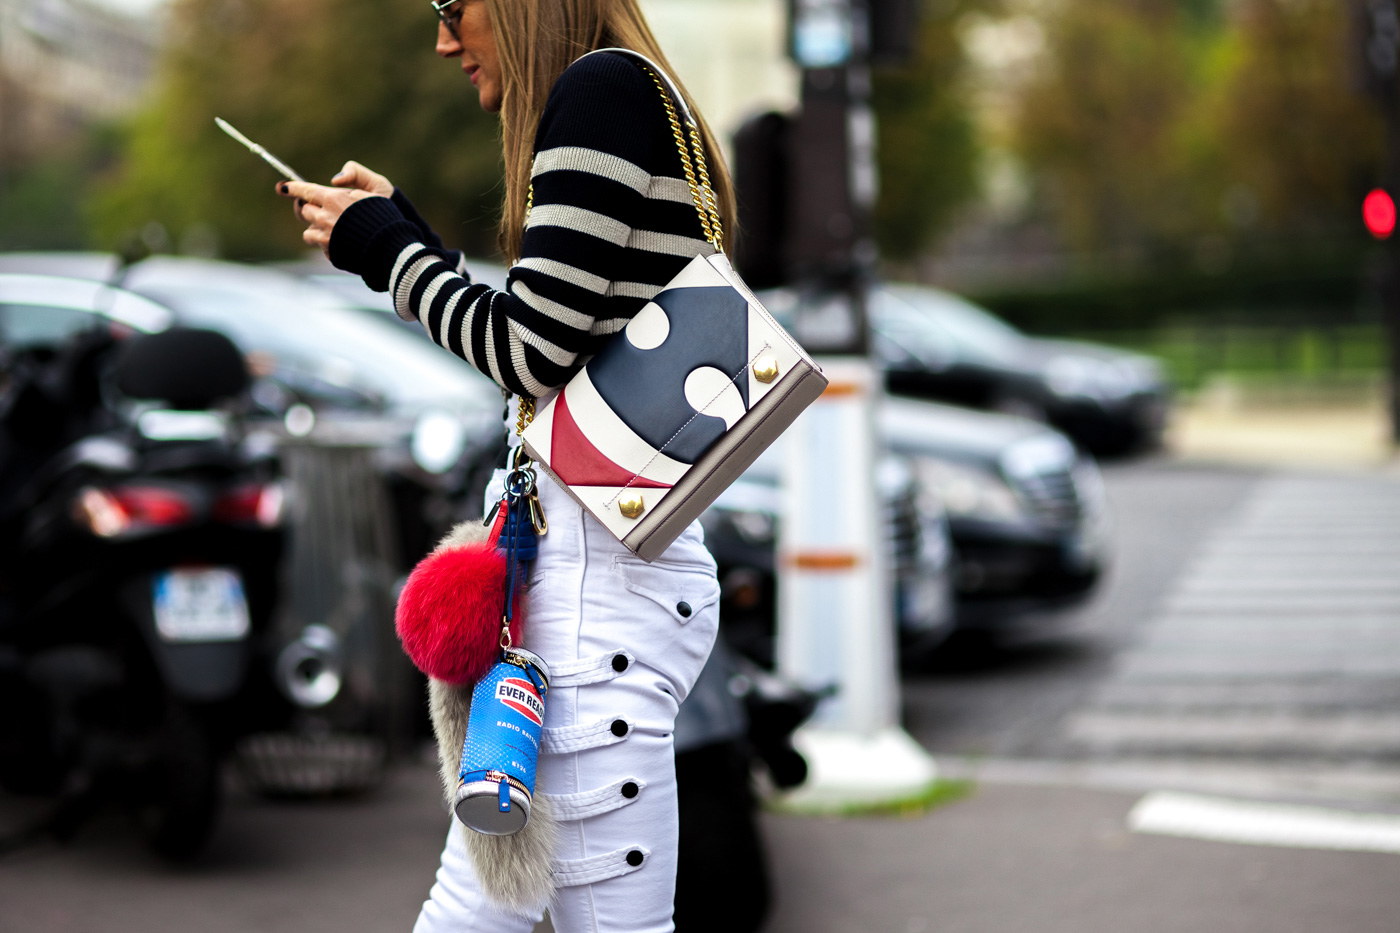 Anna Dello Russo wearing Isabel Marant outfit and Anya Hindmarch bags after a show at Paris Fashion Week